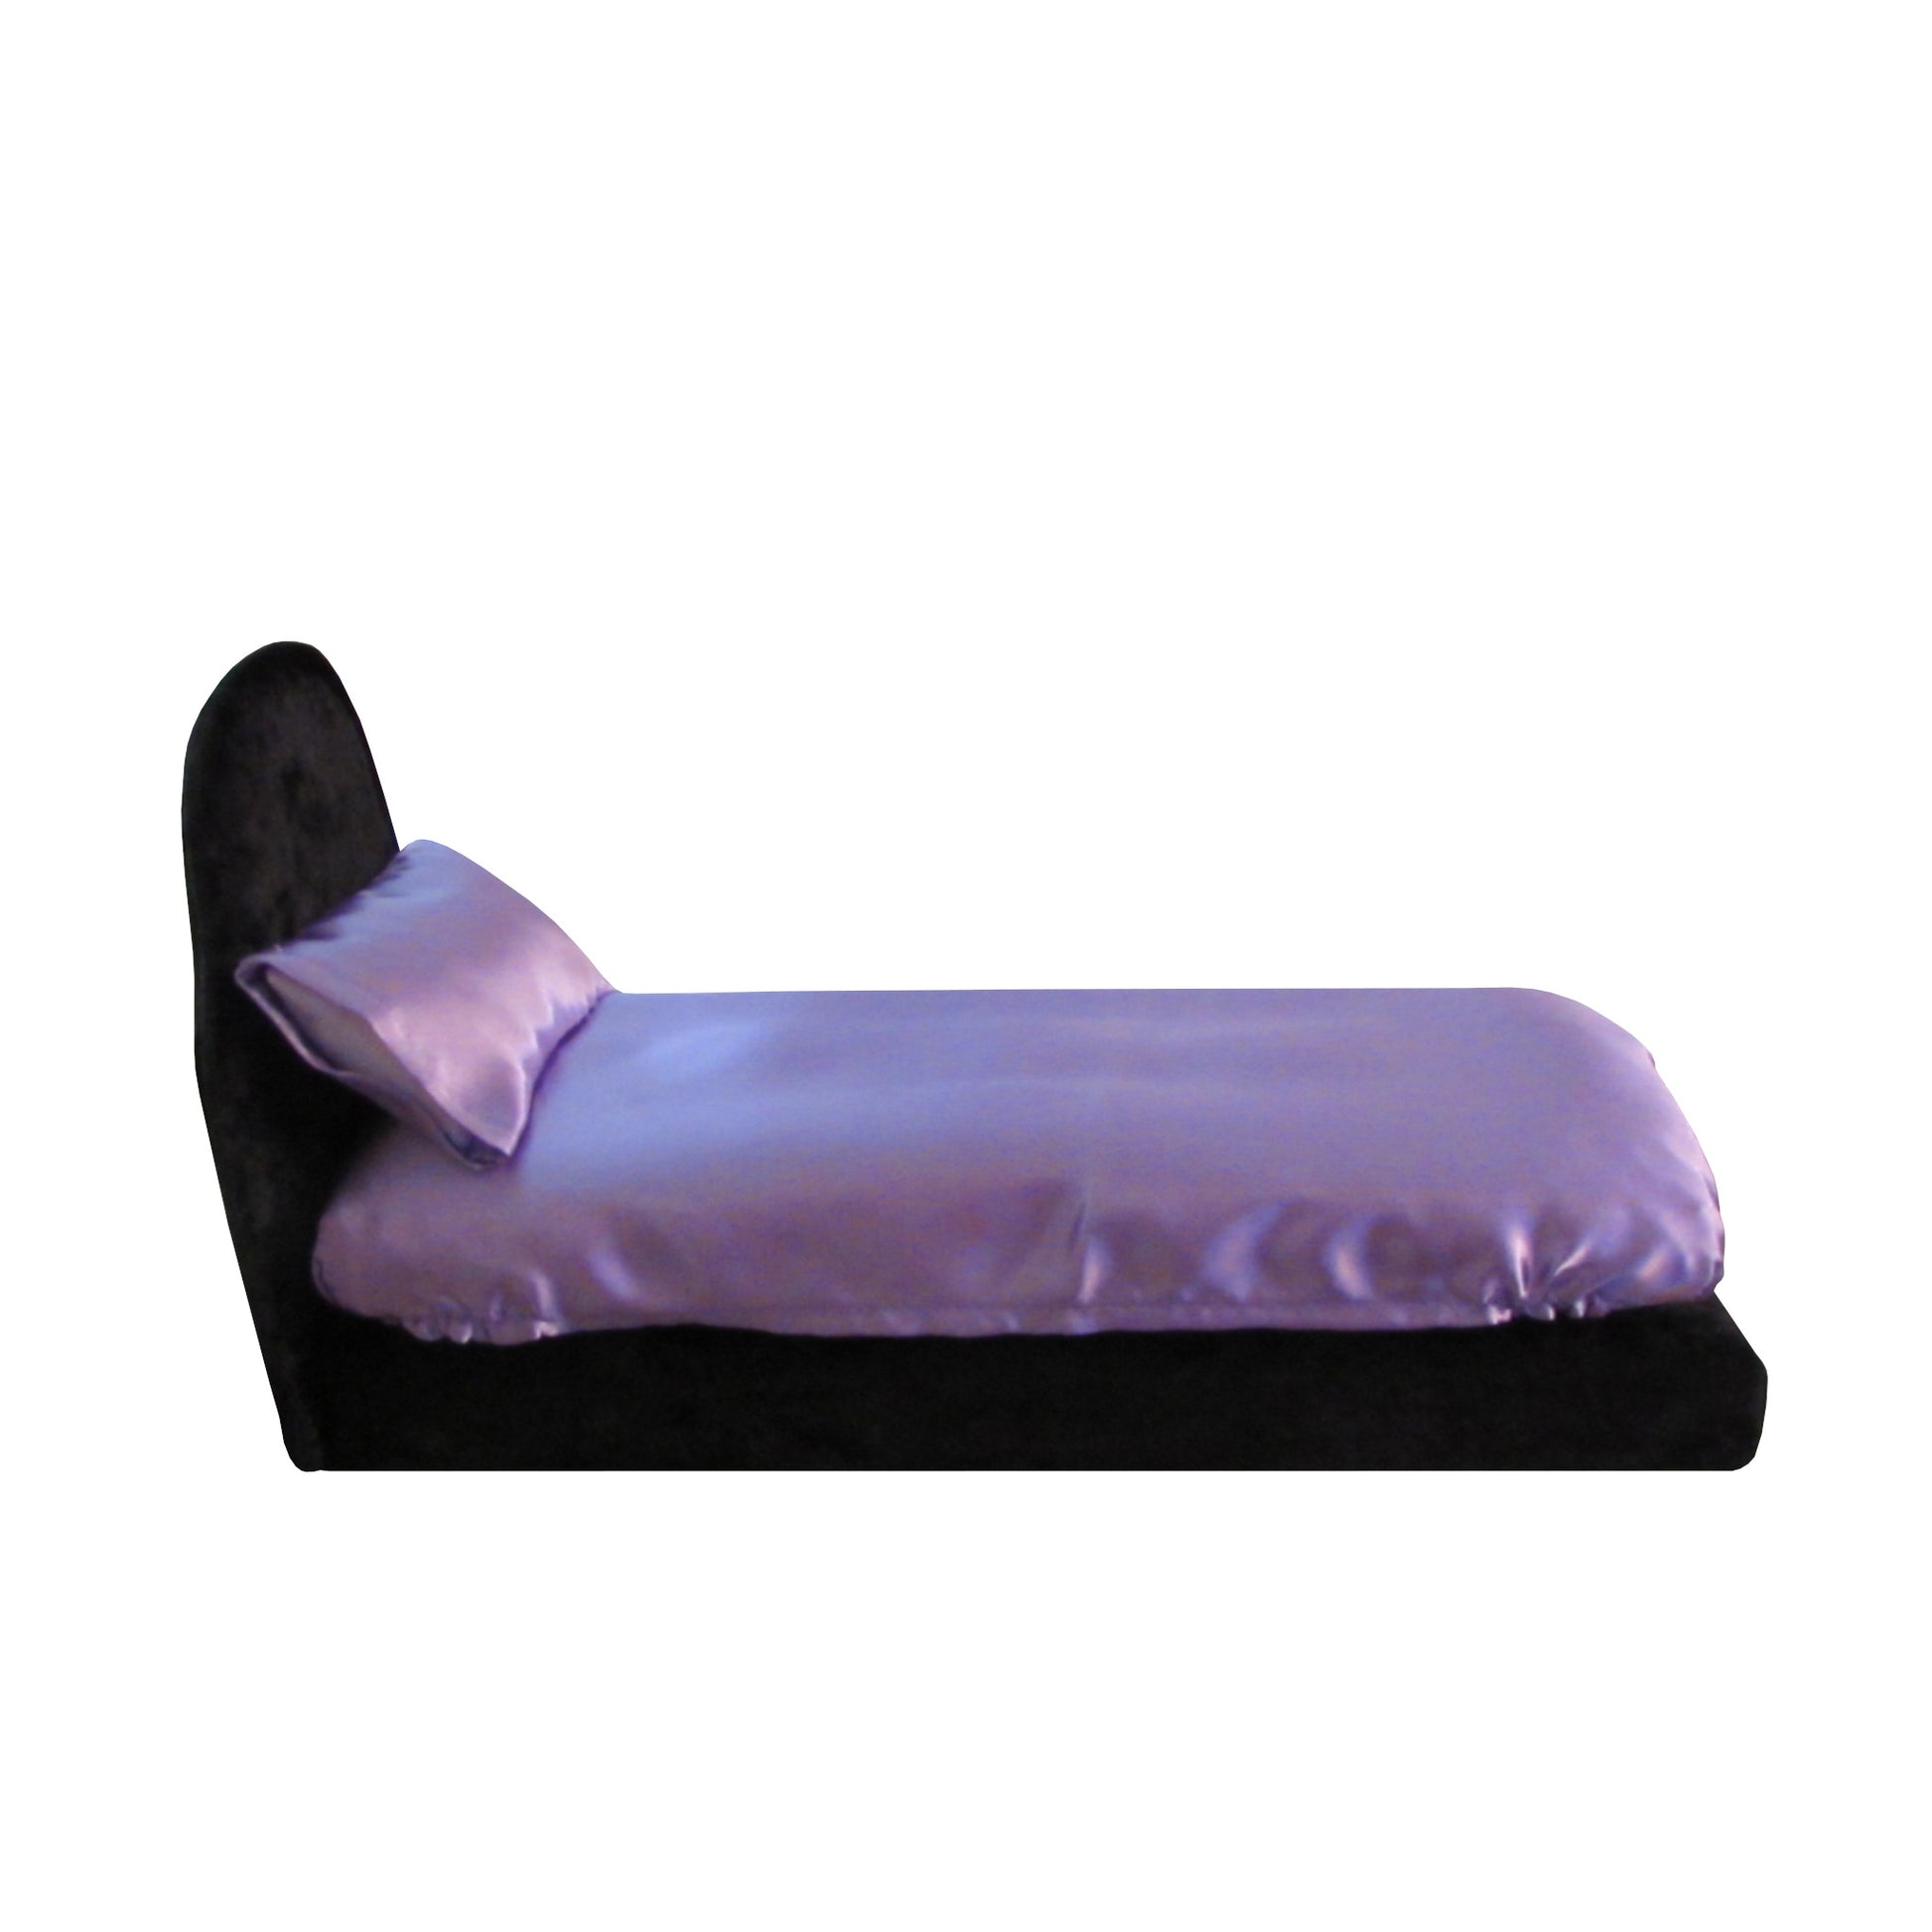 Lilac Satin Fitted Sheet and Pillowcase with Black Crushed Velvet Doll Bed for 11.5-inch and 12-inch dolls